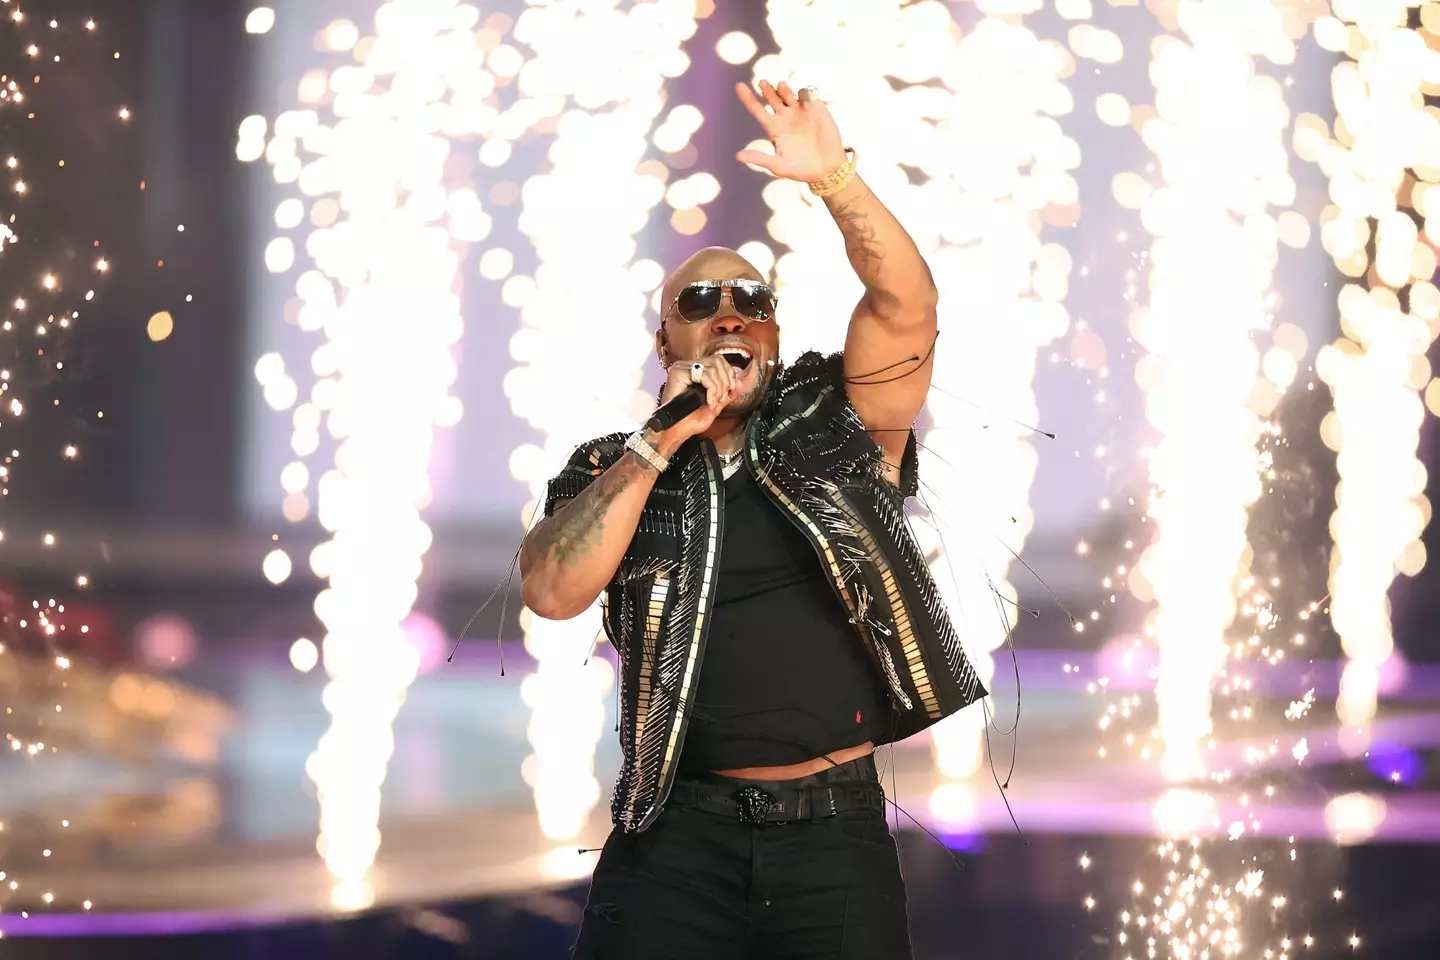 People have been left 'mind blown' after realizing why Flo Rida is called Flo Rida.